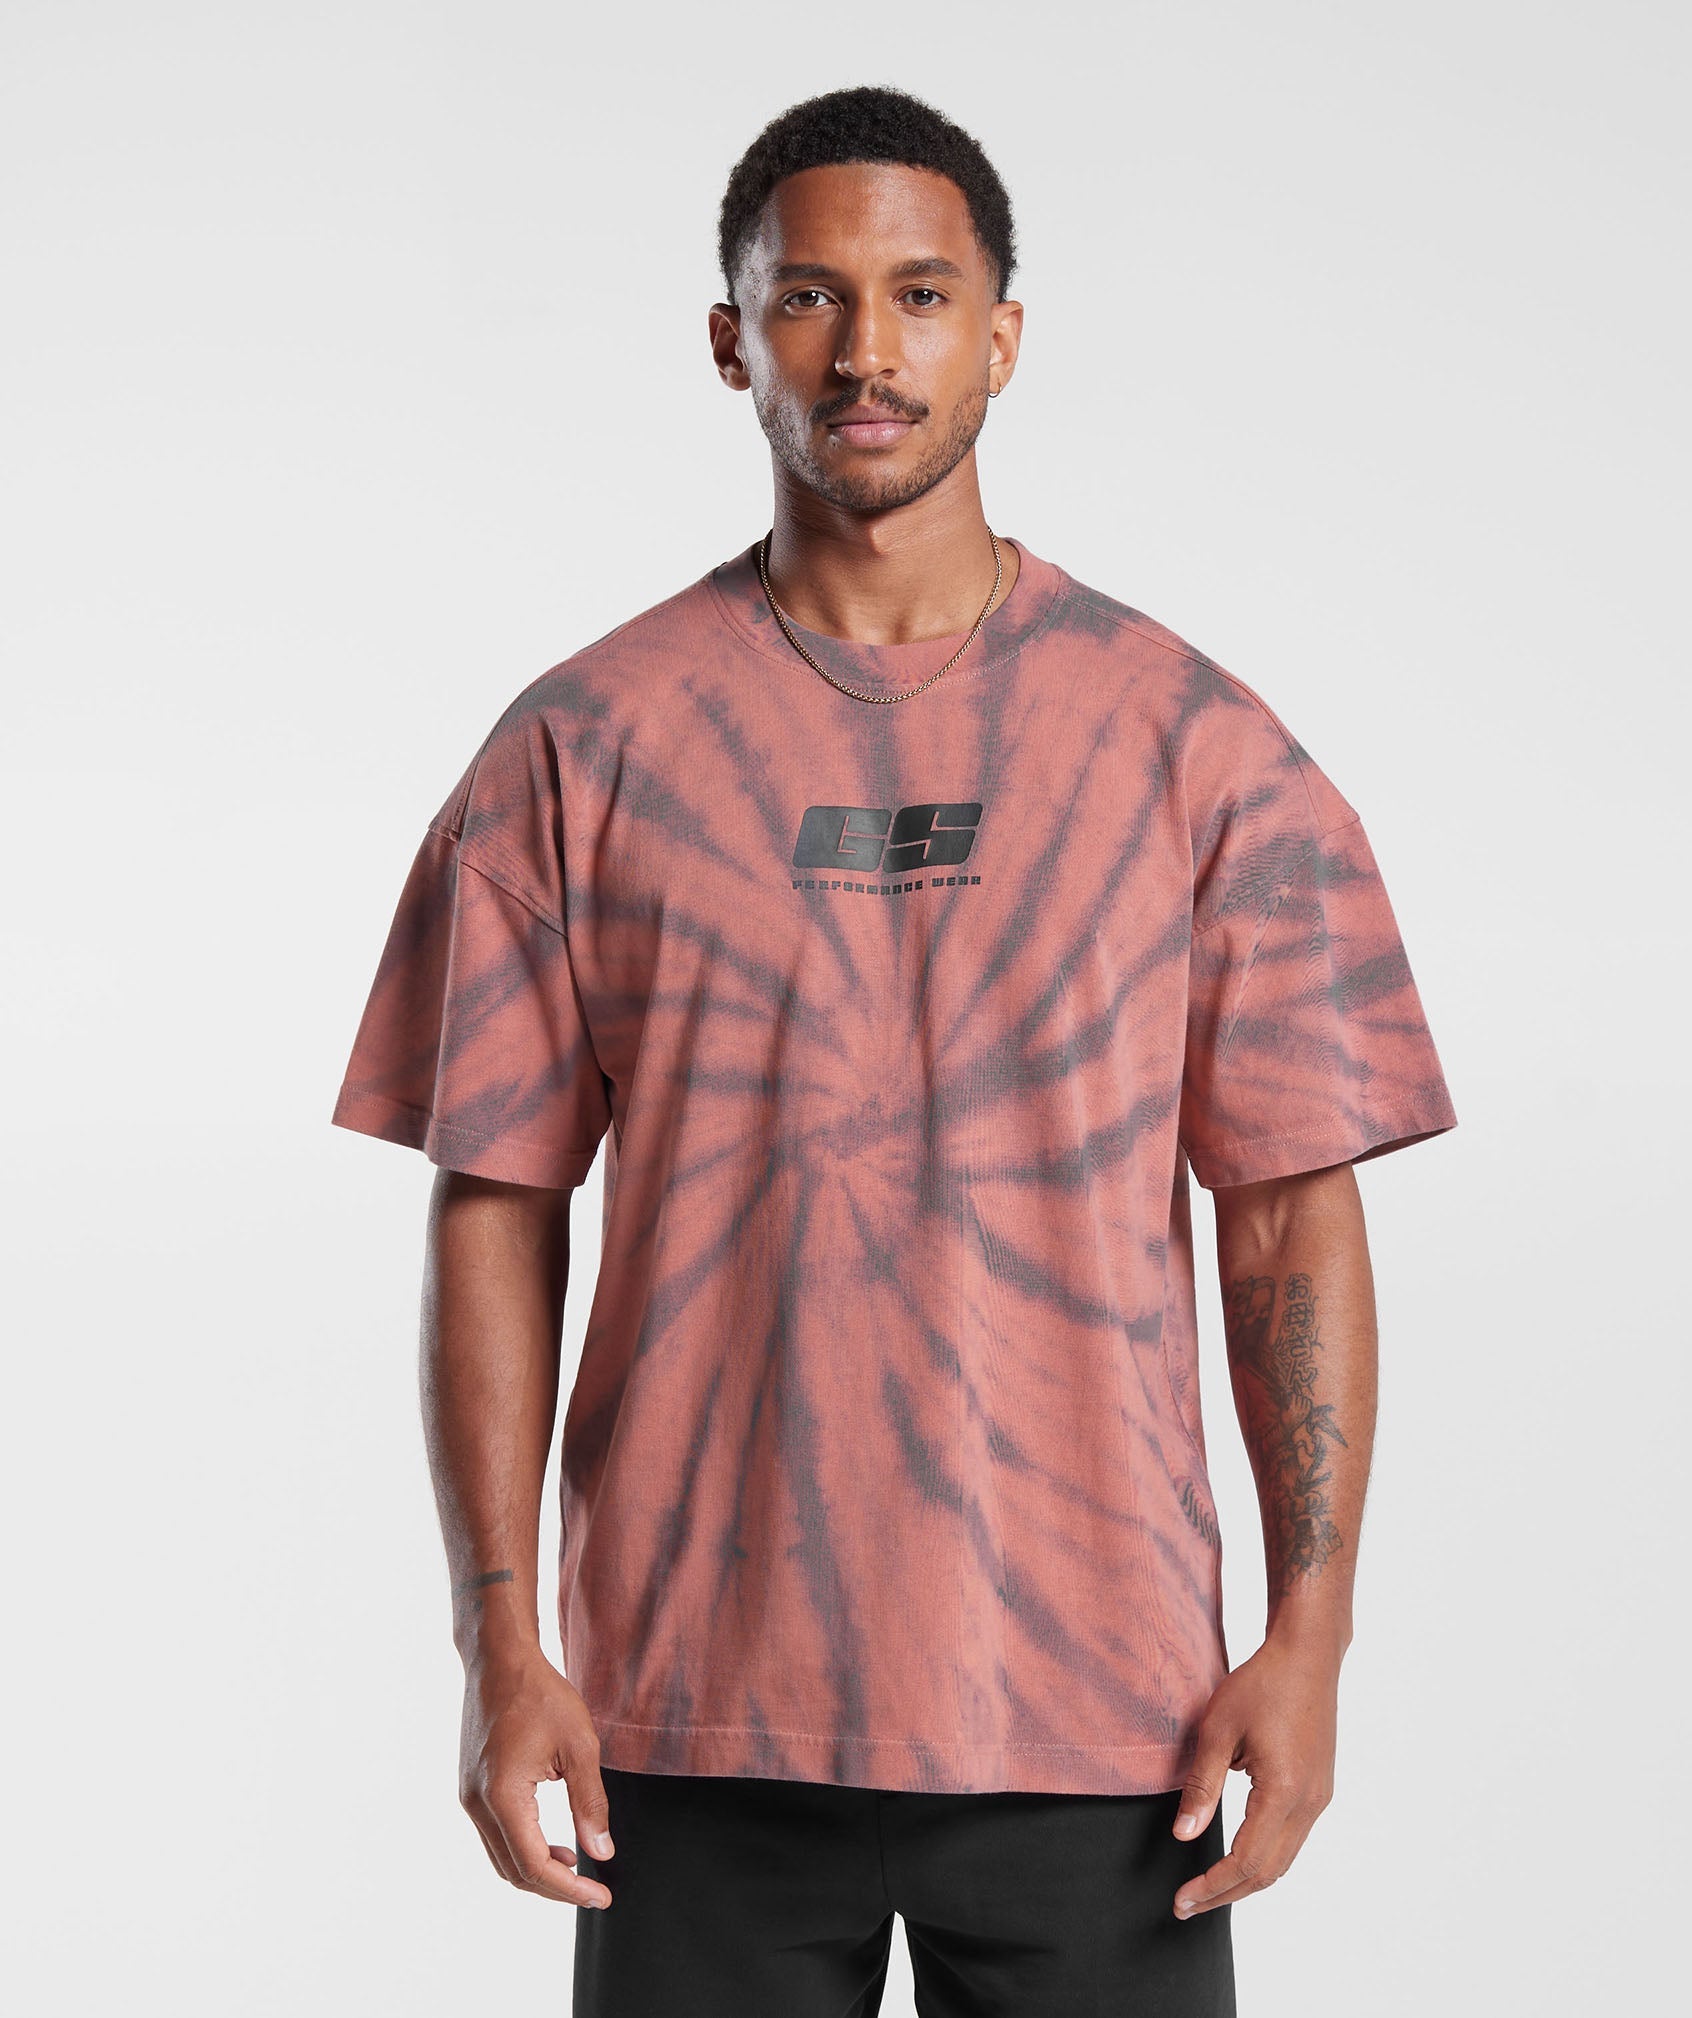 Rest Day T-Shirt in Terracotta Pink/Dusty Maroon/Spiral Optic Wash - view 1